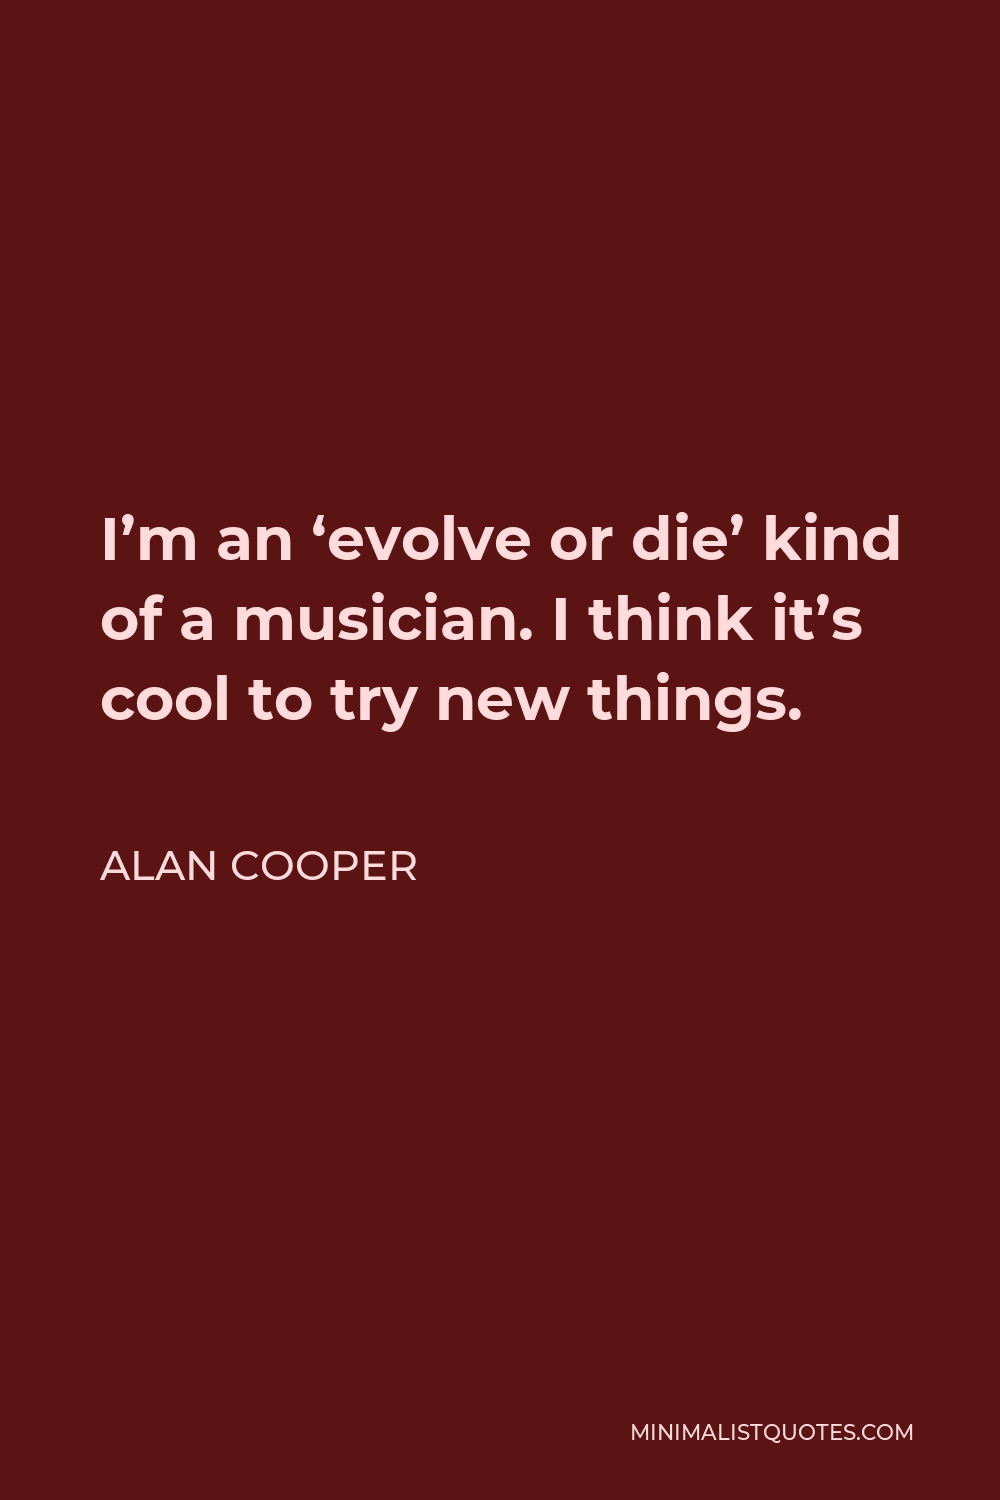 Alan Cooper Quote - I’m an ‘evolve or die’ kind of a musician. I think it’s cool to try new things.